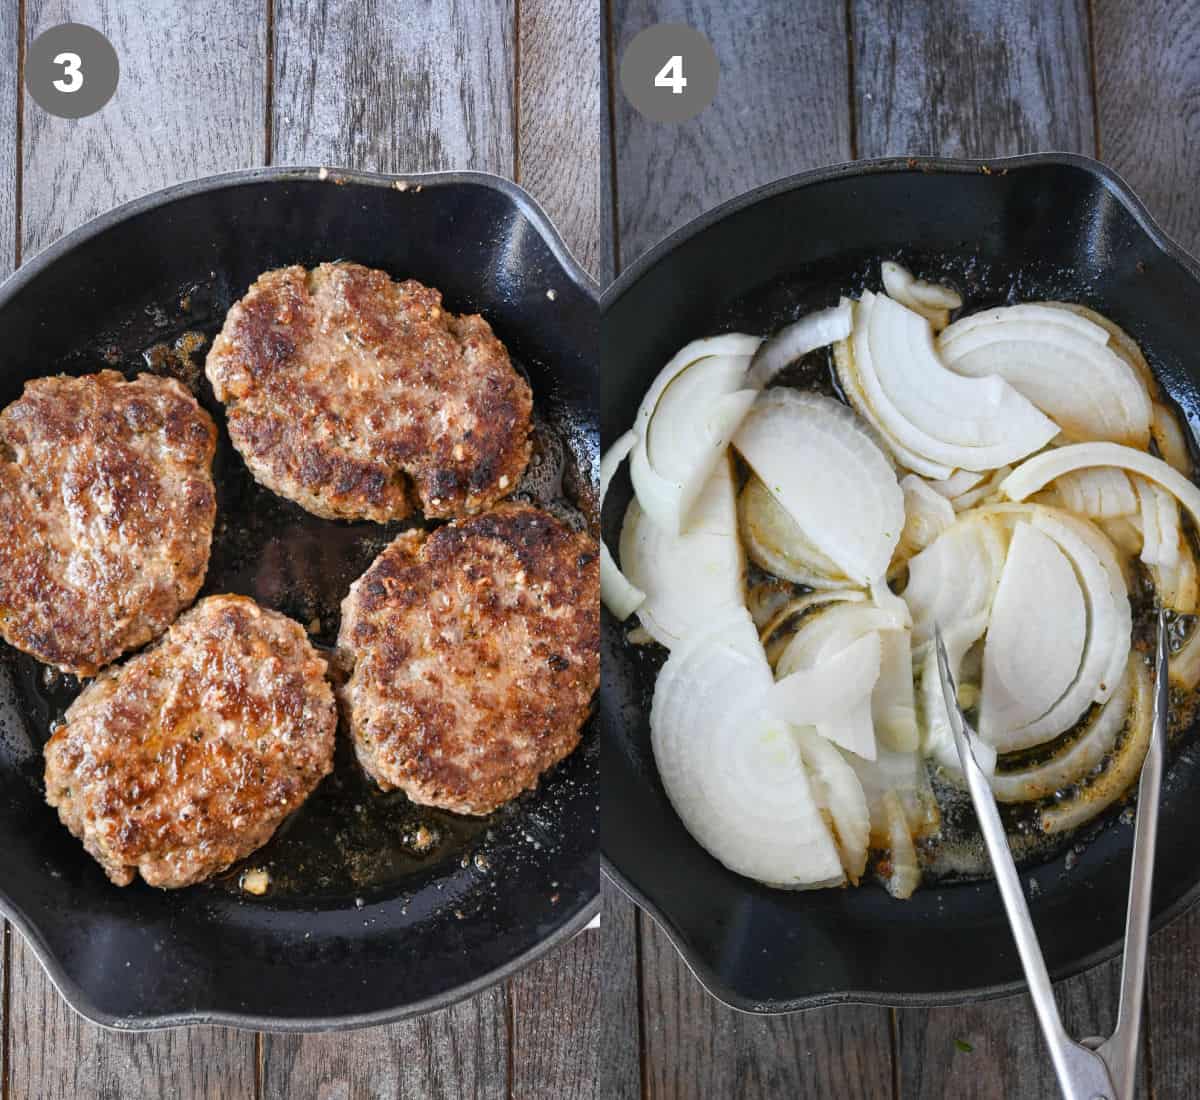 Steak patties in a skillet, then removed and onions added in.